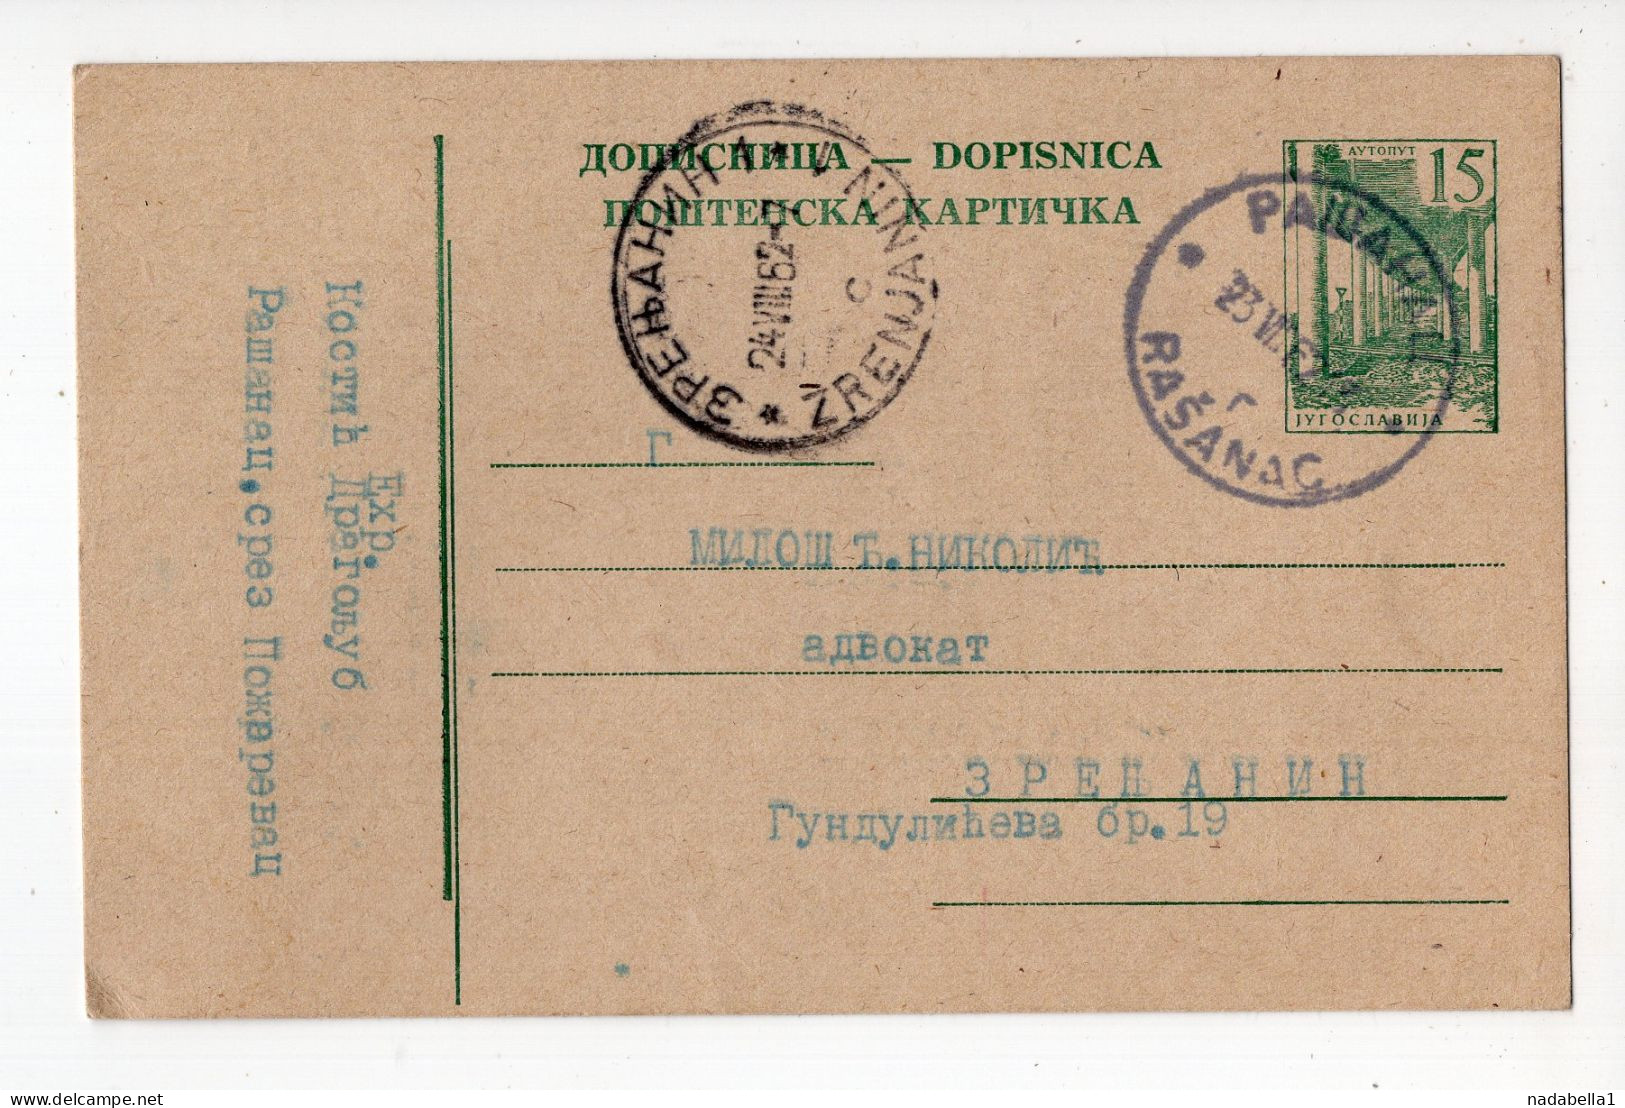 1962. YUGOSLAVIA,SERBIA,RAŠANAC,15 DIN. STATIONERY CARD,USED,ERROR:LINES OF DIFFERENT THICKNESS,PRINTING ERROR - Imperforates, Proofs & Errors